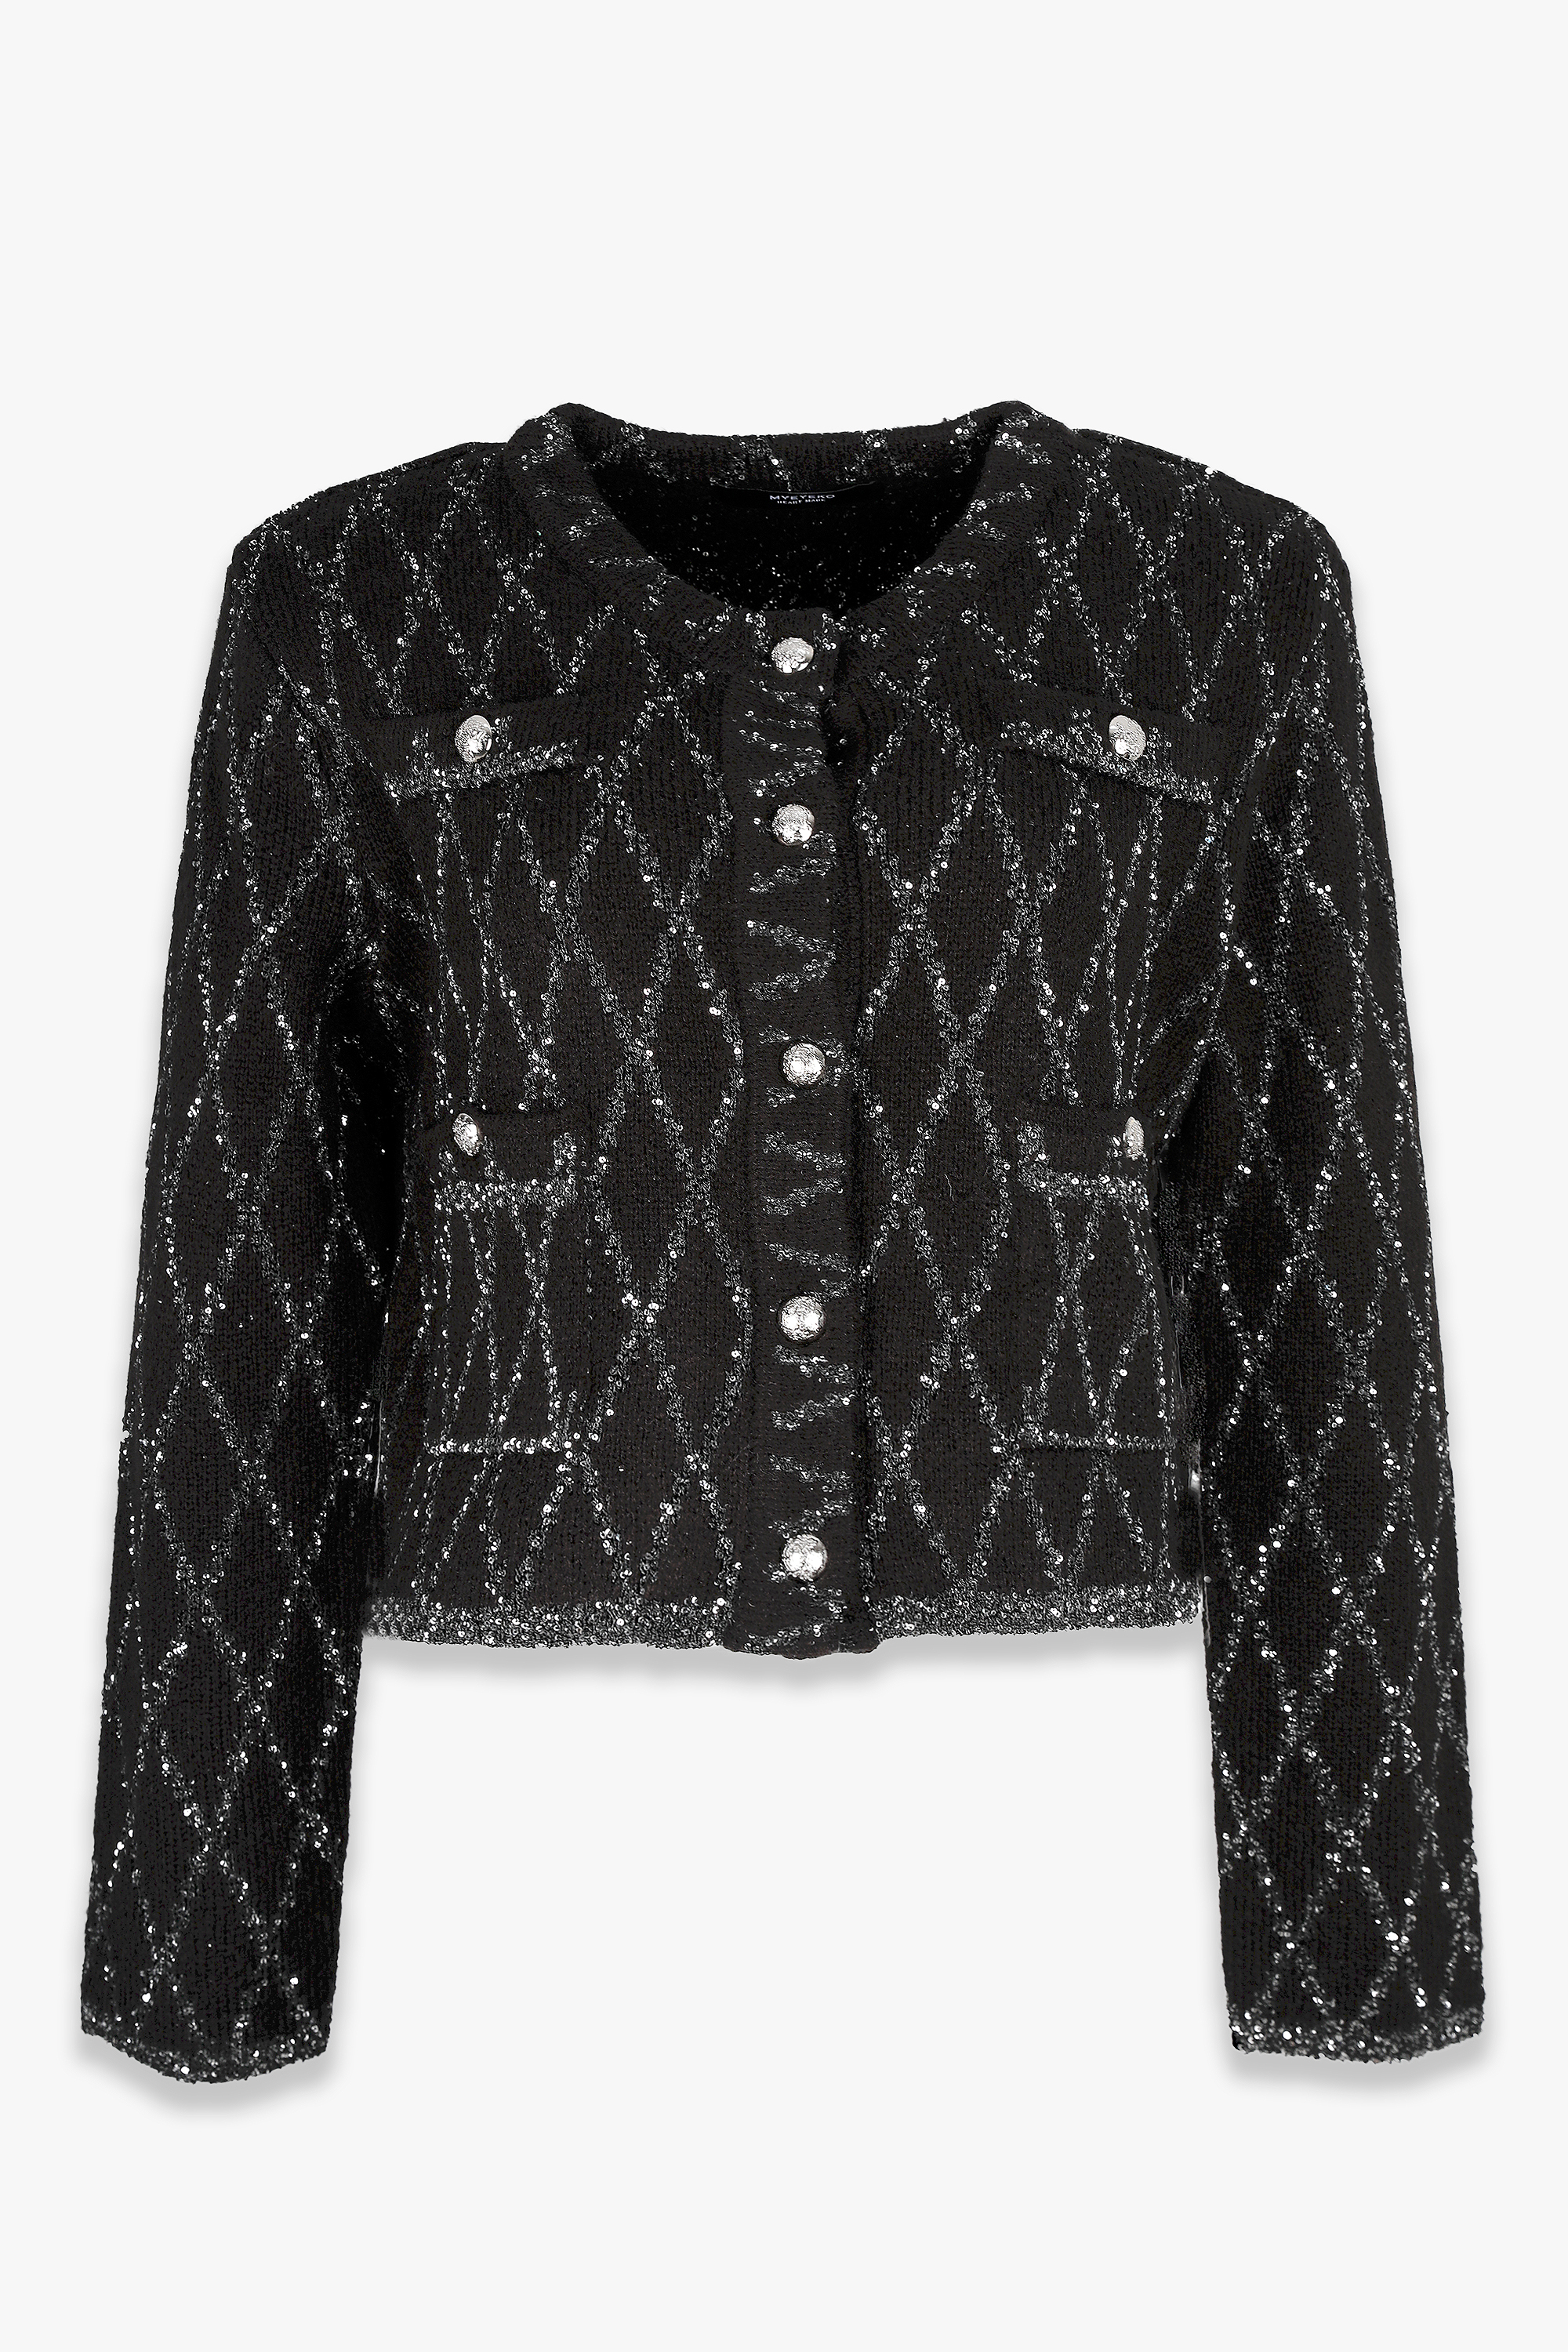 HIGH QUALITY LINE - MYEYEKO 23 SPRING COLLECTION / SEQUIN DIA KNIT JACKET (BLACK)